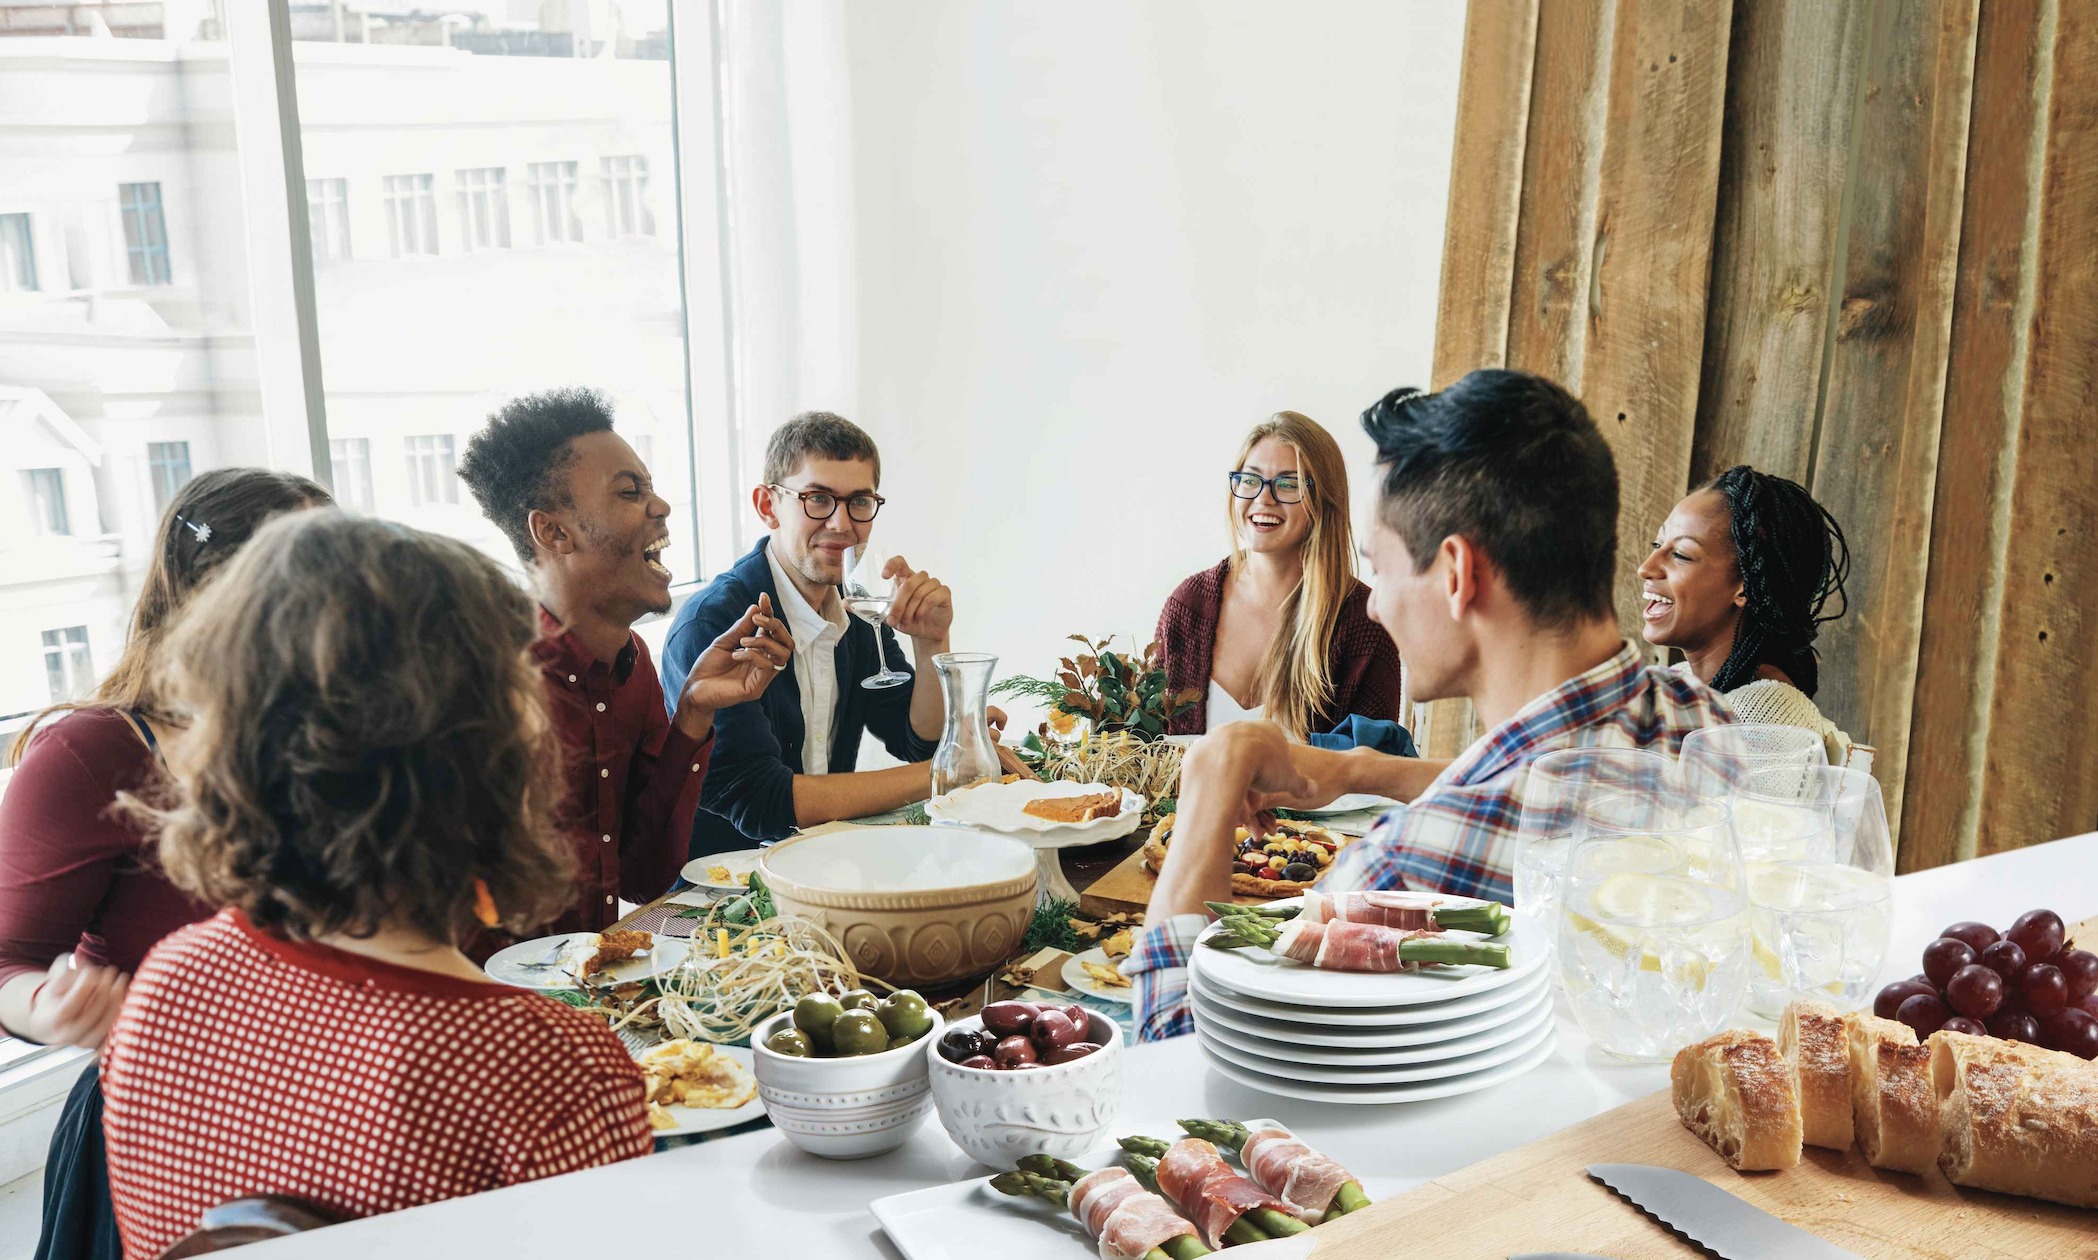 Friends gather together around a dining table for a feast. Being together with people you care for is about one of the best medicines for the mind, body and spirit.